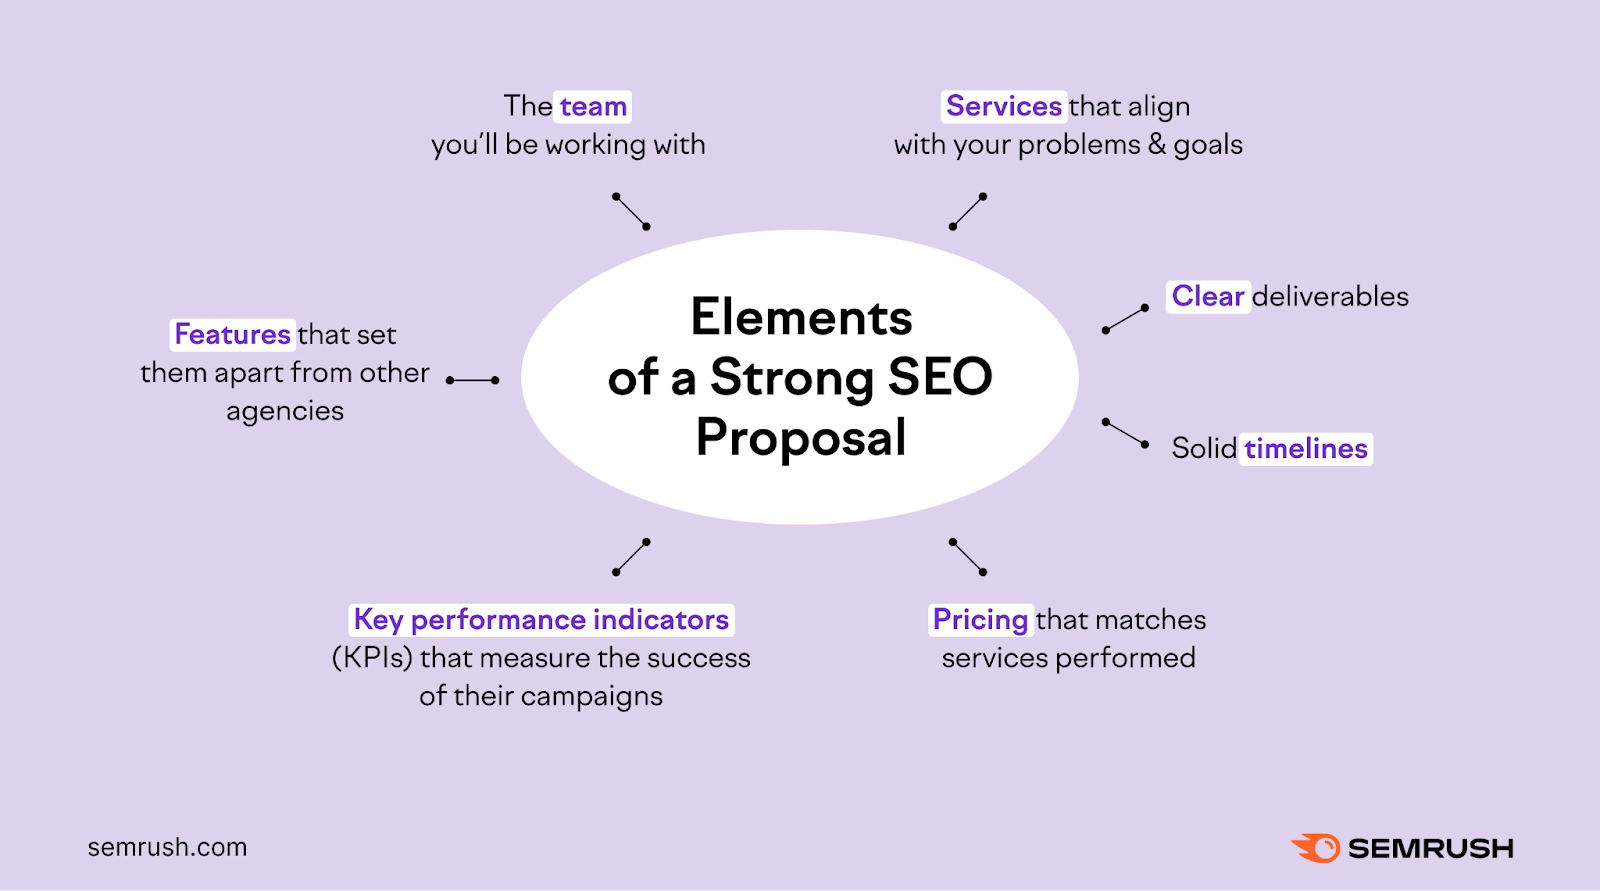 An infographic by Semrush showing elements of a strong SEO proposal